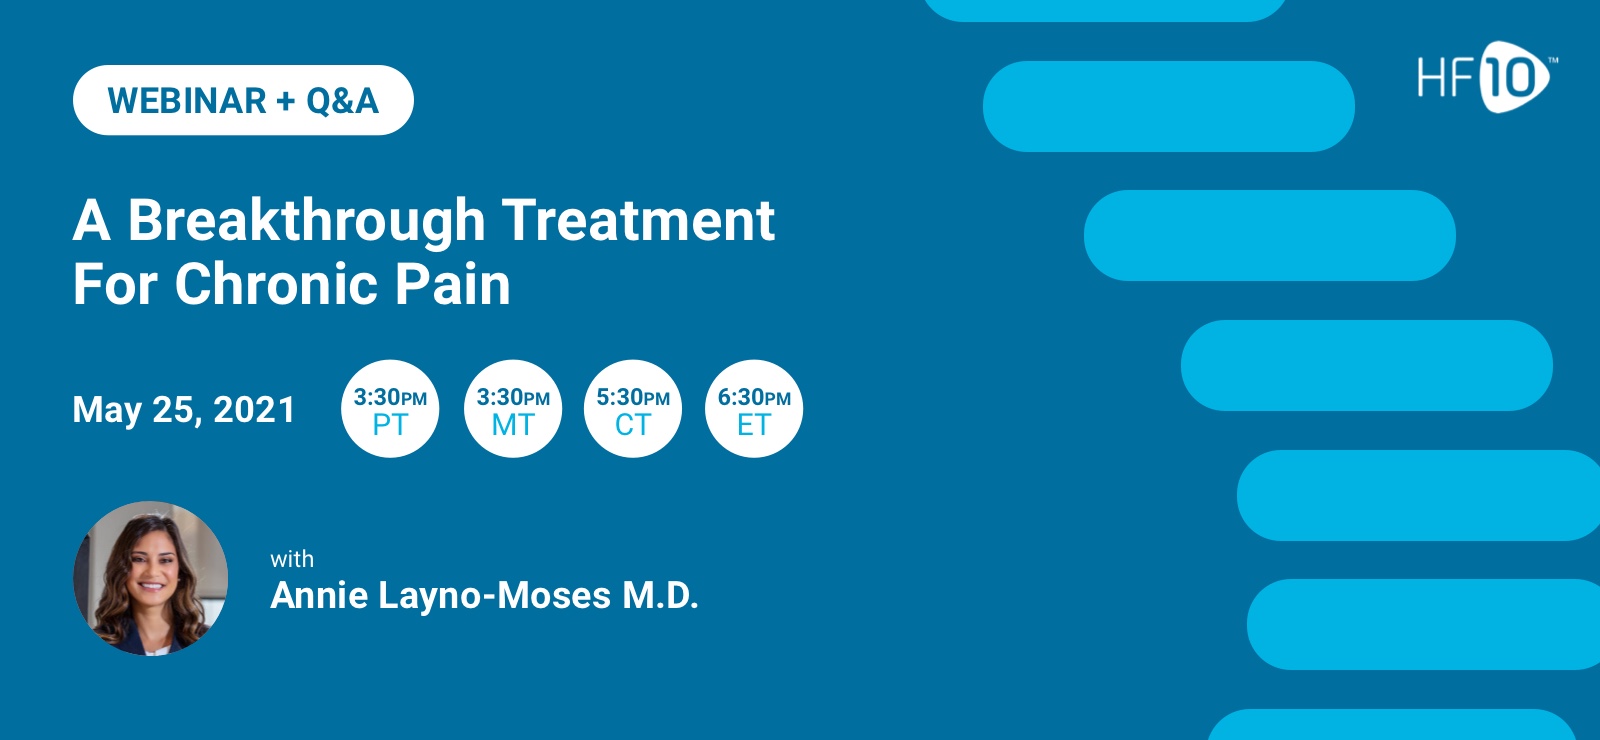 Learn About A Breakthrough Treatment for Chronic Pain